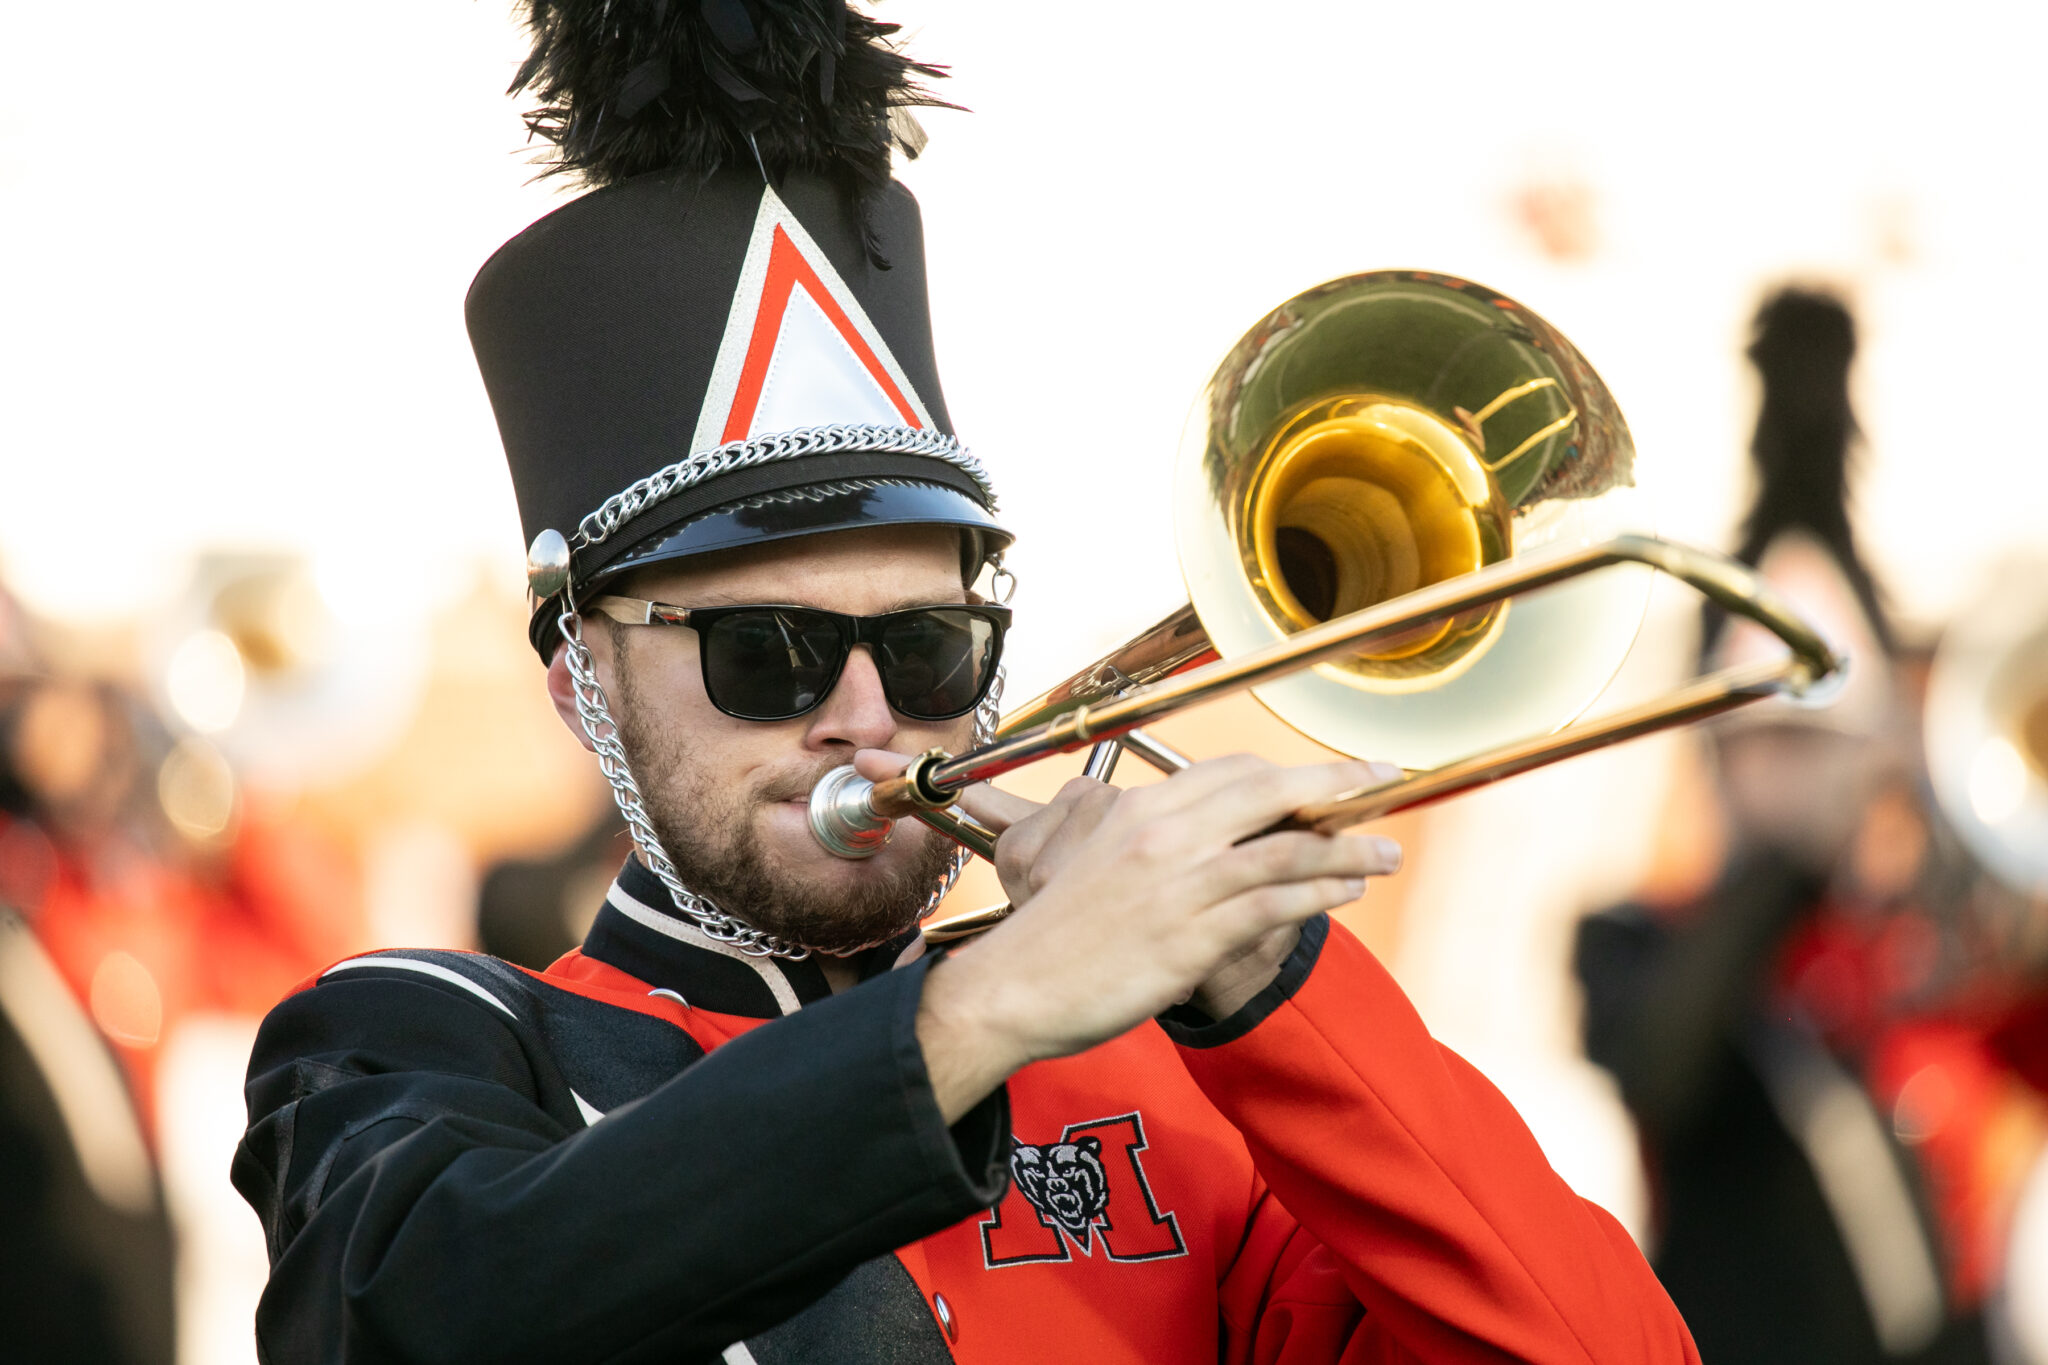 Marching Band member plays the trombone